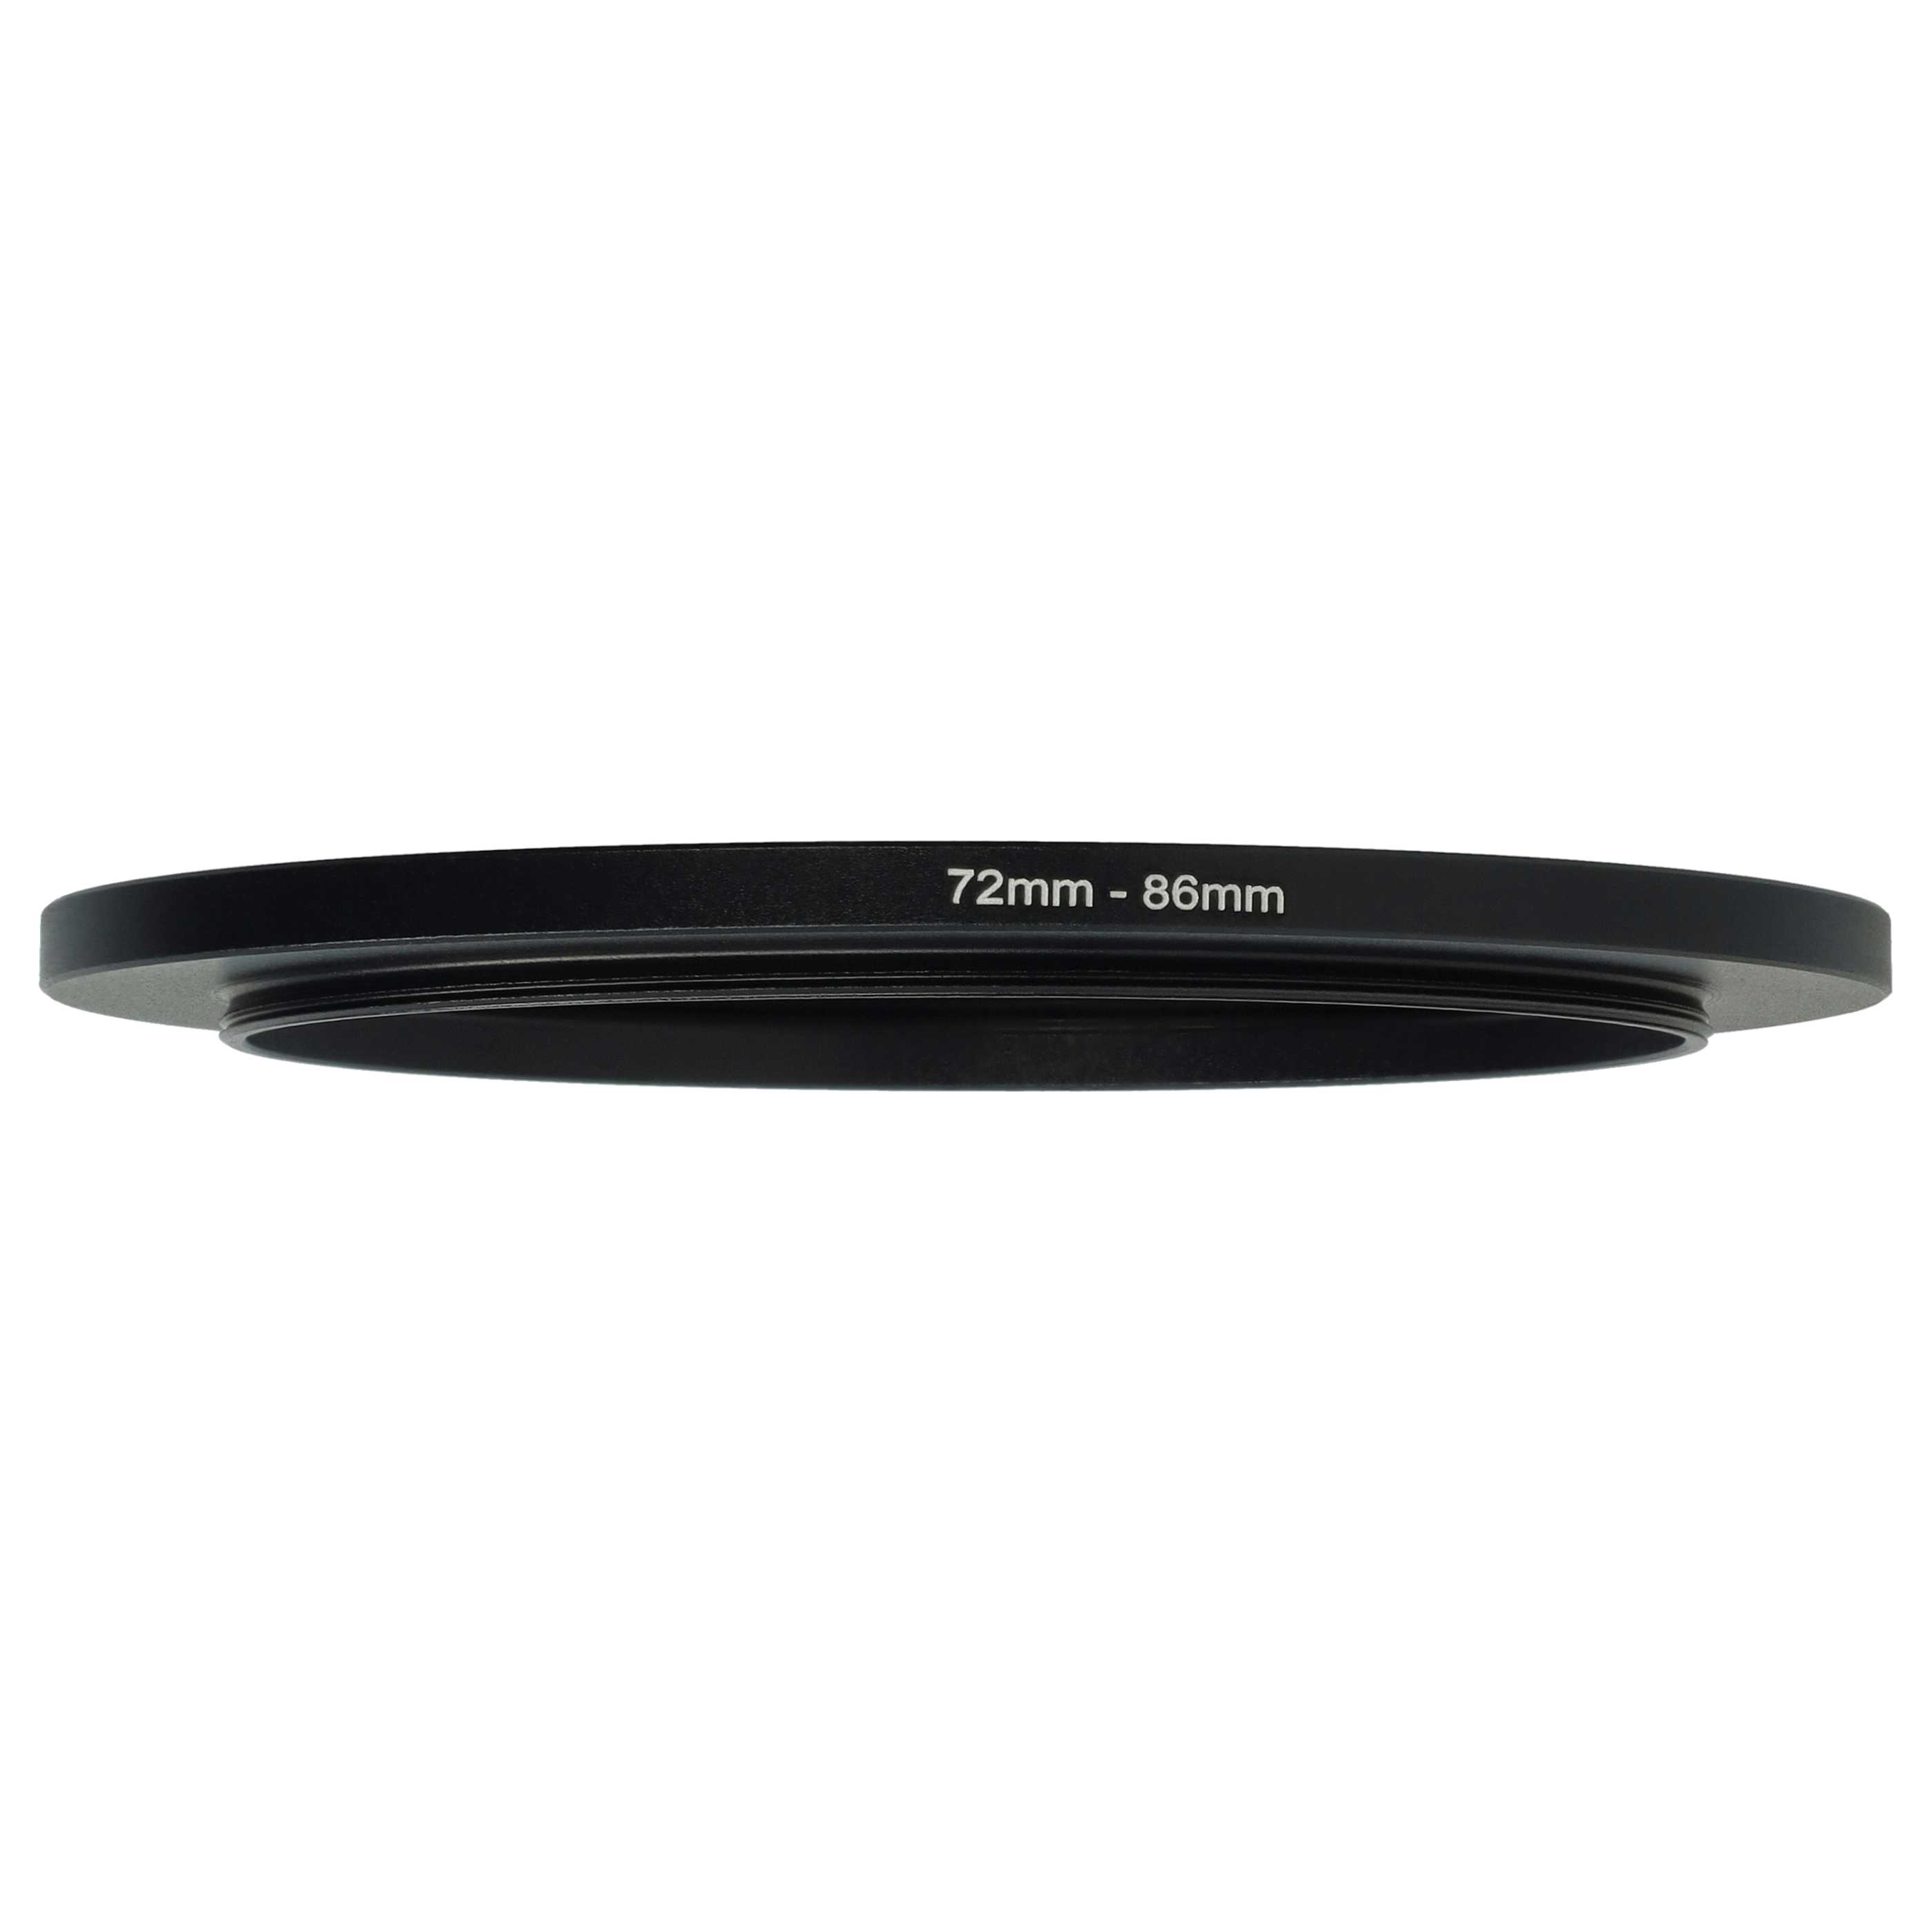 Step-Up Ring Adapter of 72 mm to 86 mmfor various Camera Lens - Filter Adapter